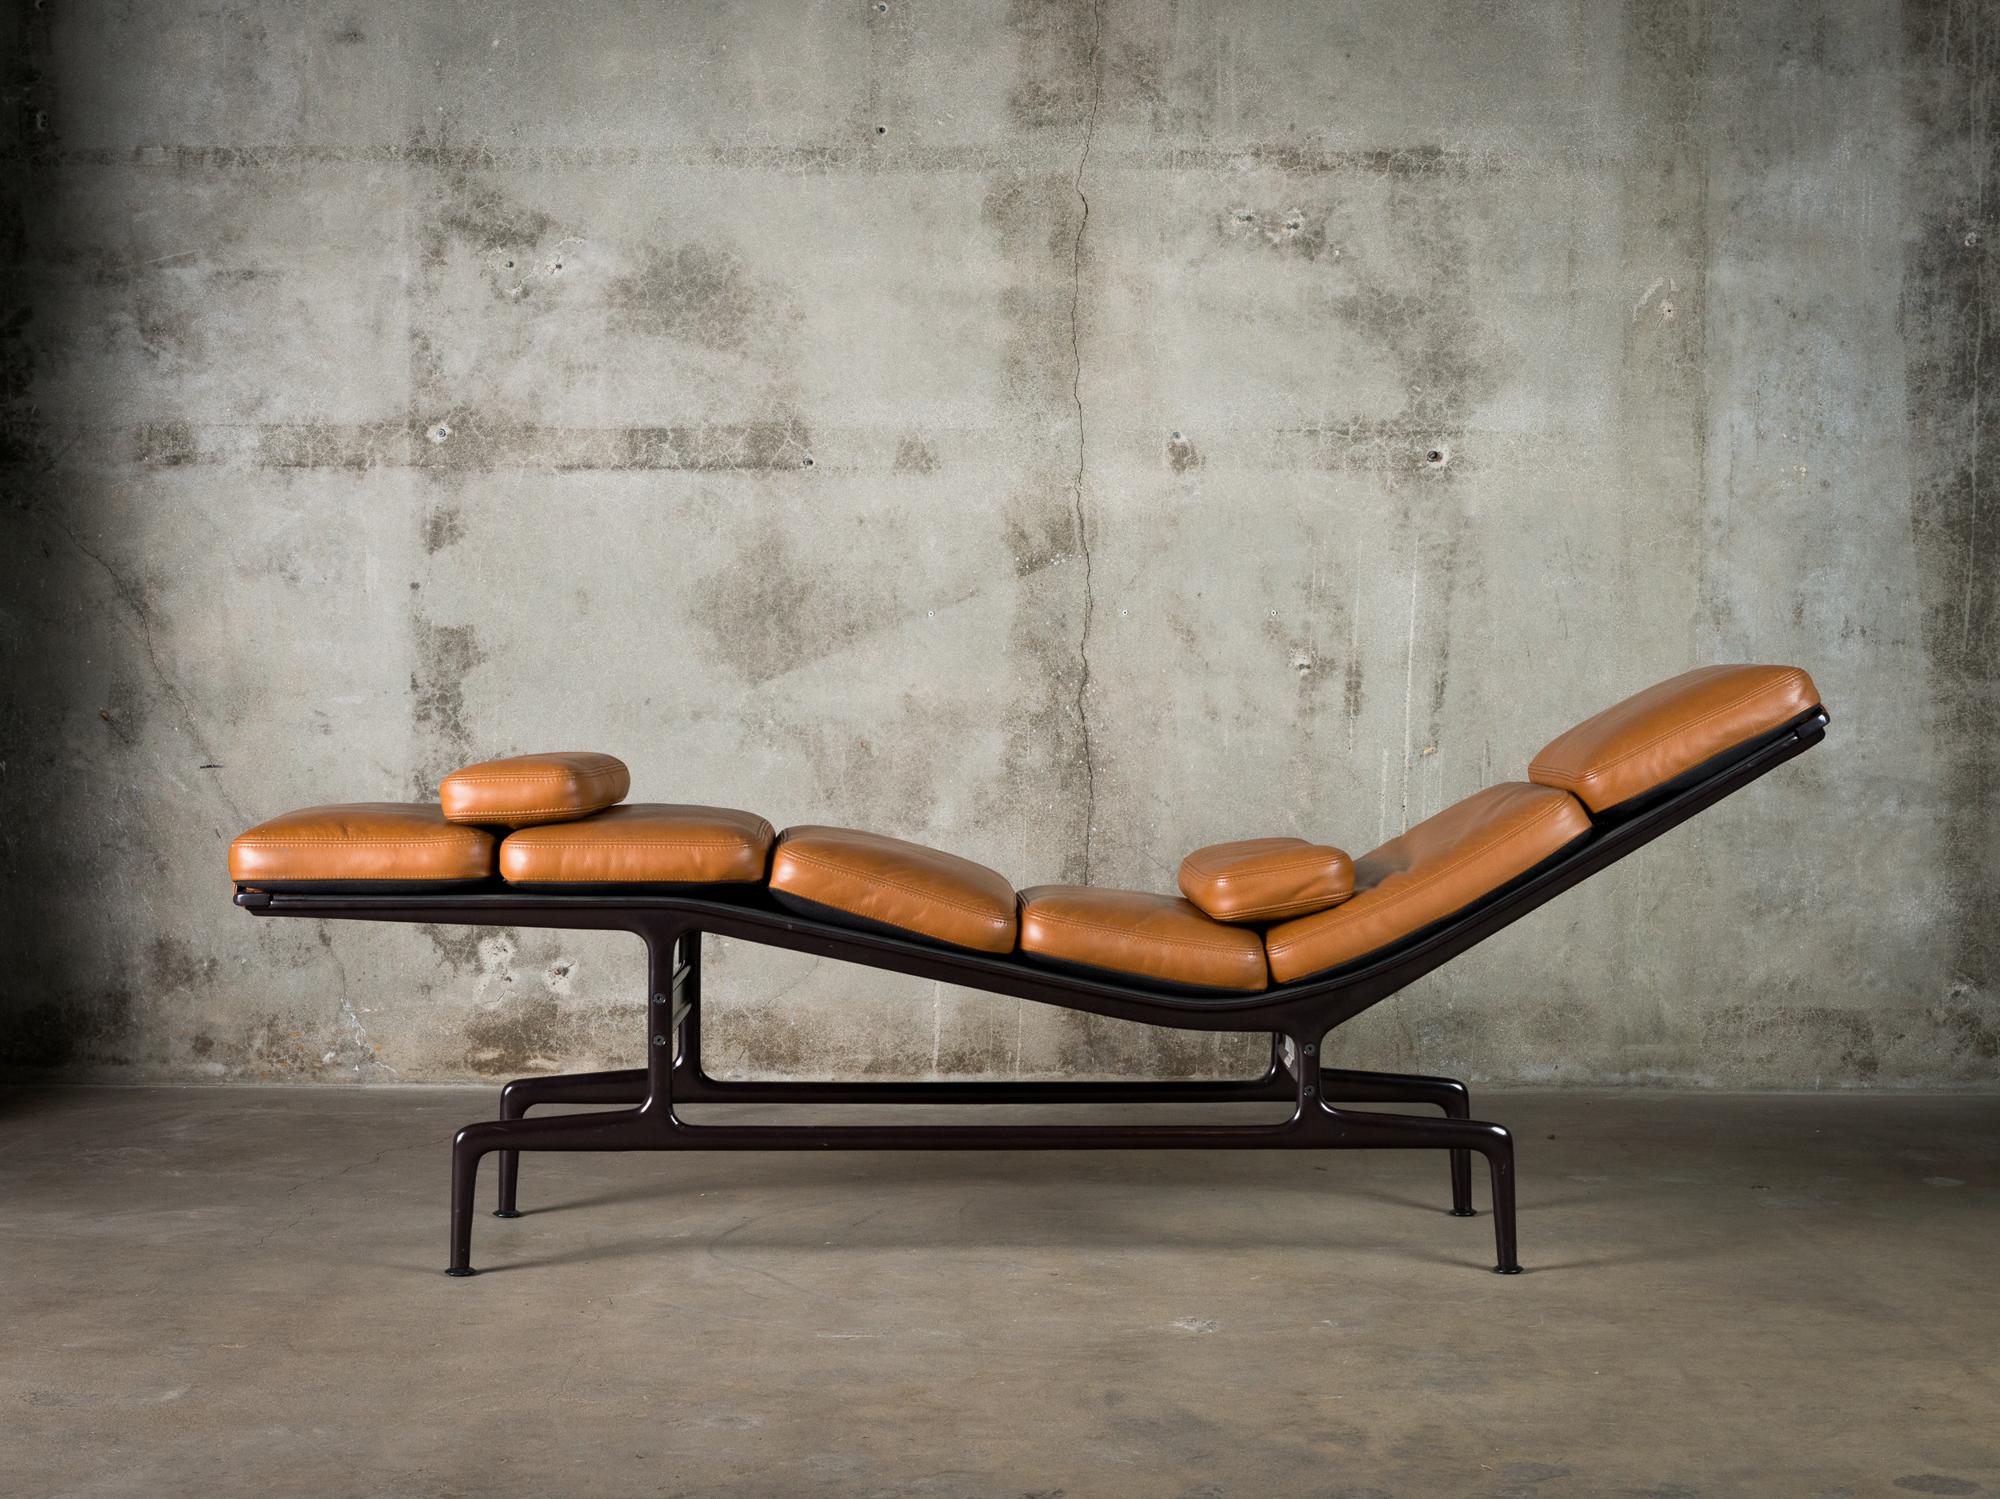 One Eames chaise lounge (designed in 1969, for Billy Wilders office) in cognac leather by Ray & Charles Eames, produced 1980s.